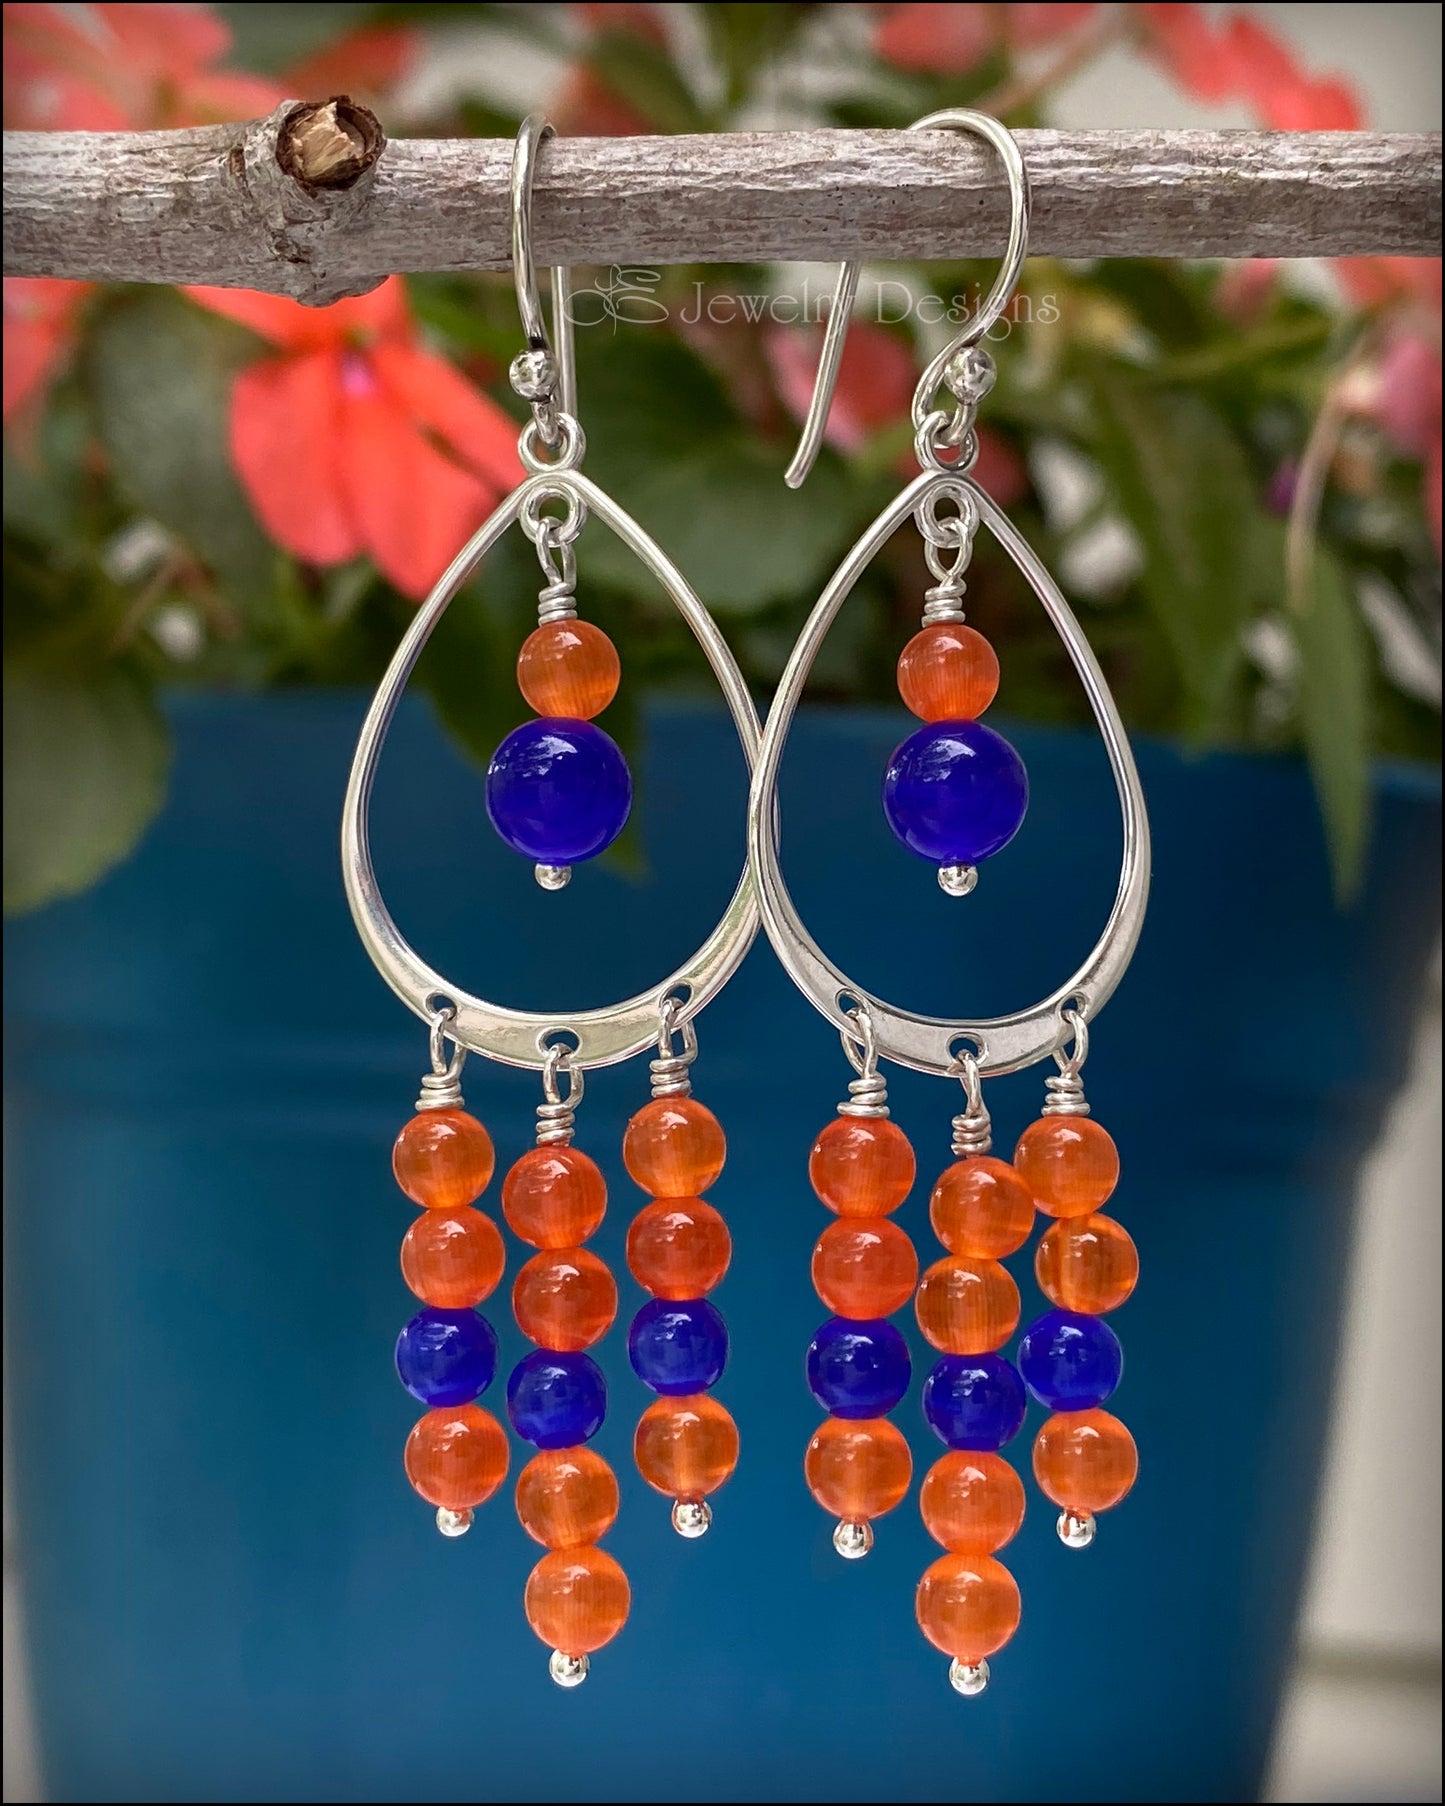 Load image into Gallery viewer, Sterling Silver Astros Chandelier Earrings - LE Jewelry Designs
